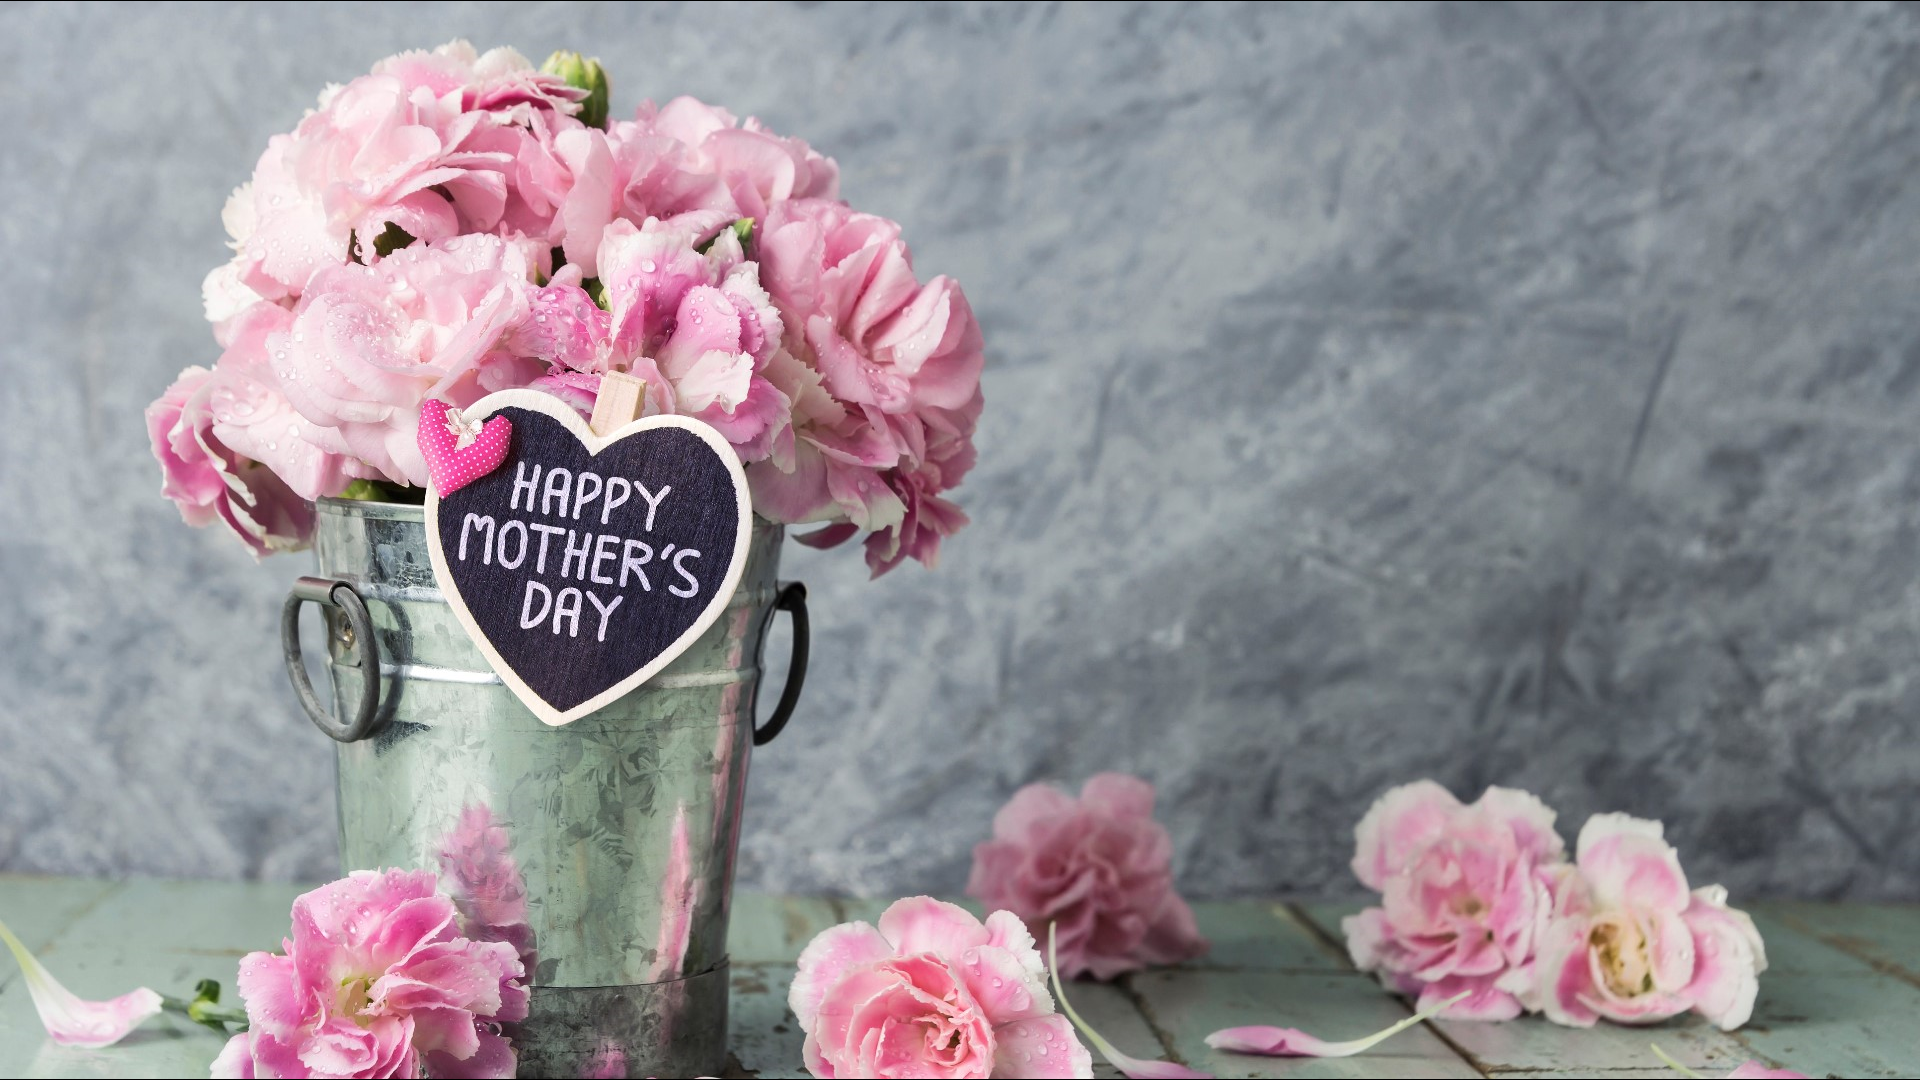 For some Mother's Day isn't a happy occasion and can bring up feeling of loss and grief. Family therapist Dr. Sheryl Zeigler has advice on how to cope.